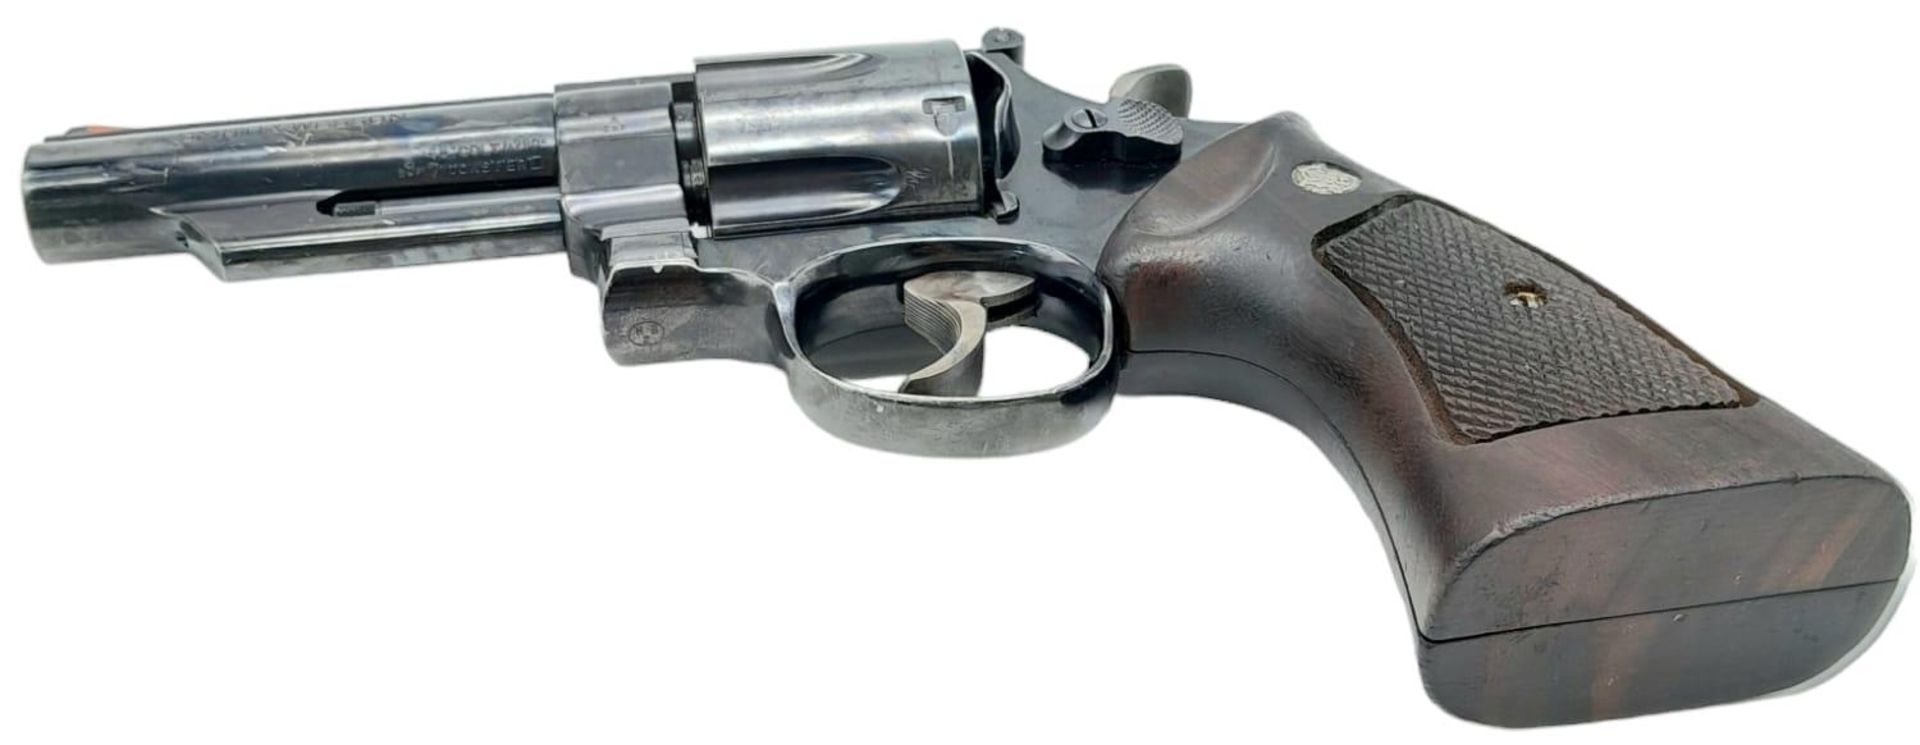 A Smith and Wesson .45 Calibre Revolver. This USA made pistol has a 4 inch barrel with a nice dark - Image 5 of 17